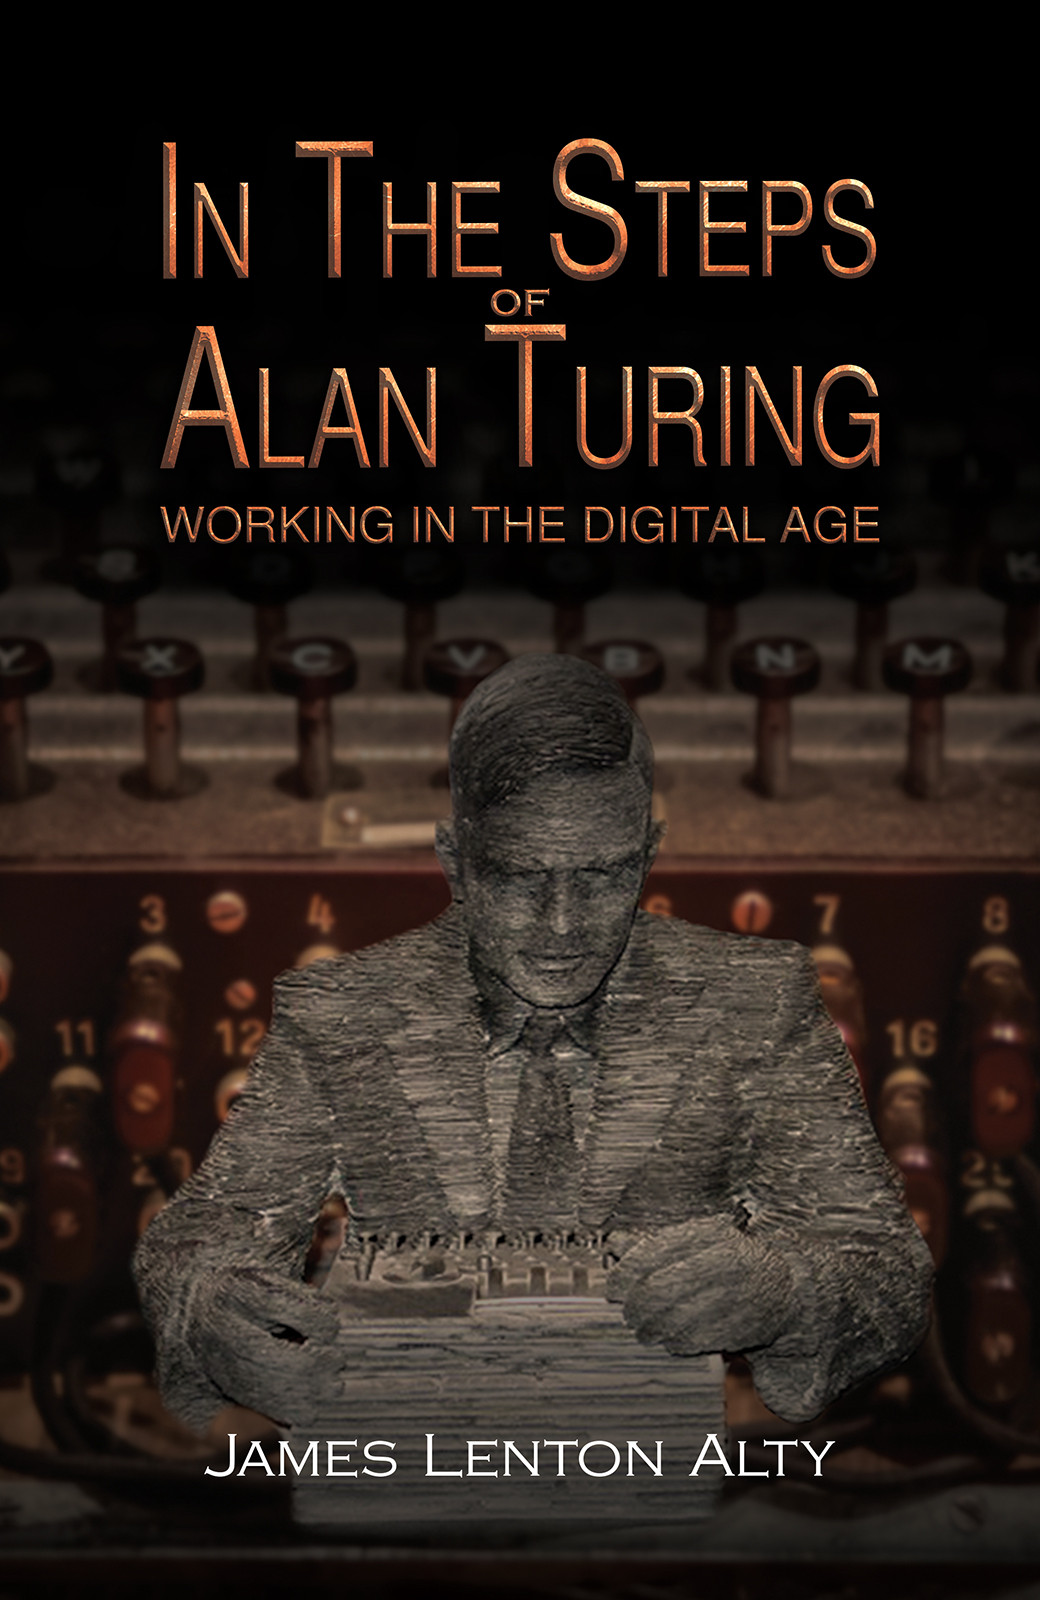 In the Steps of Alan Turing: Working in the Digital Age